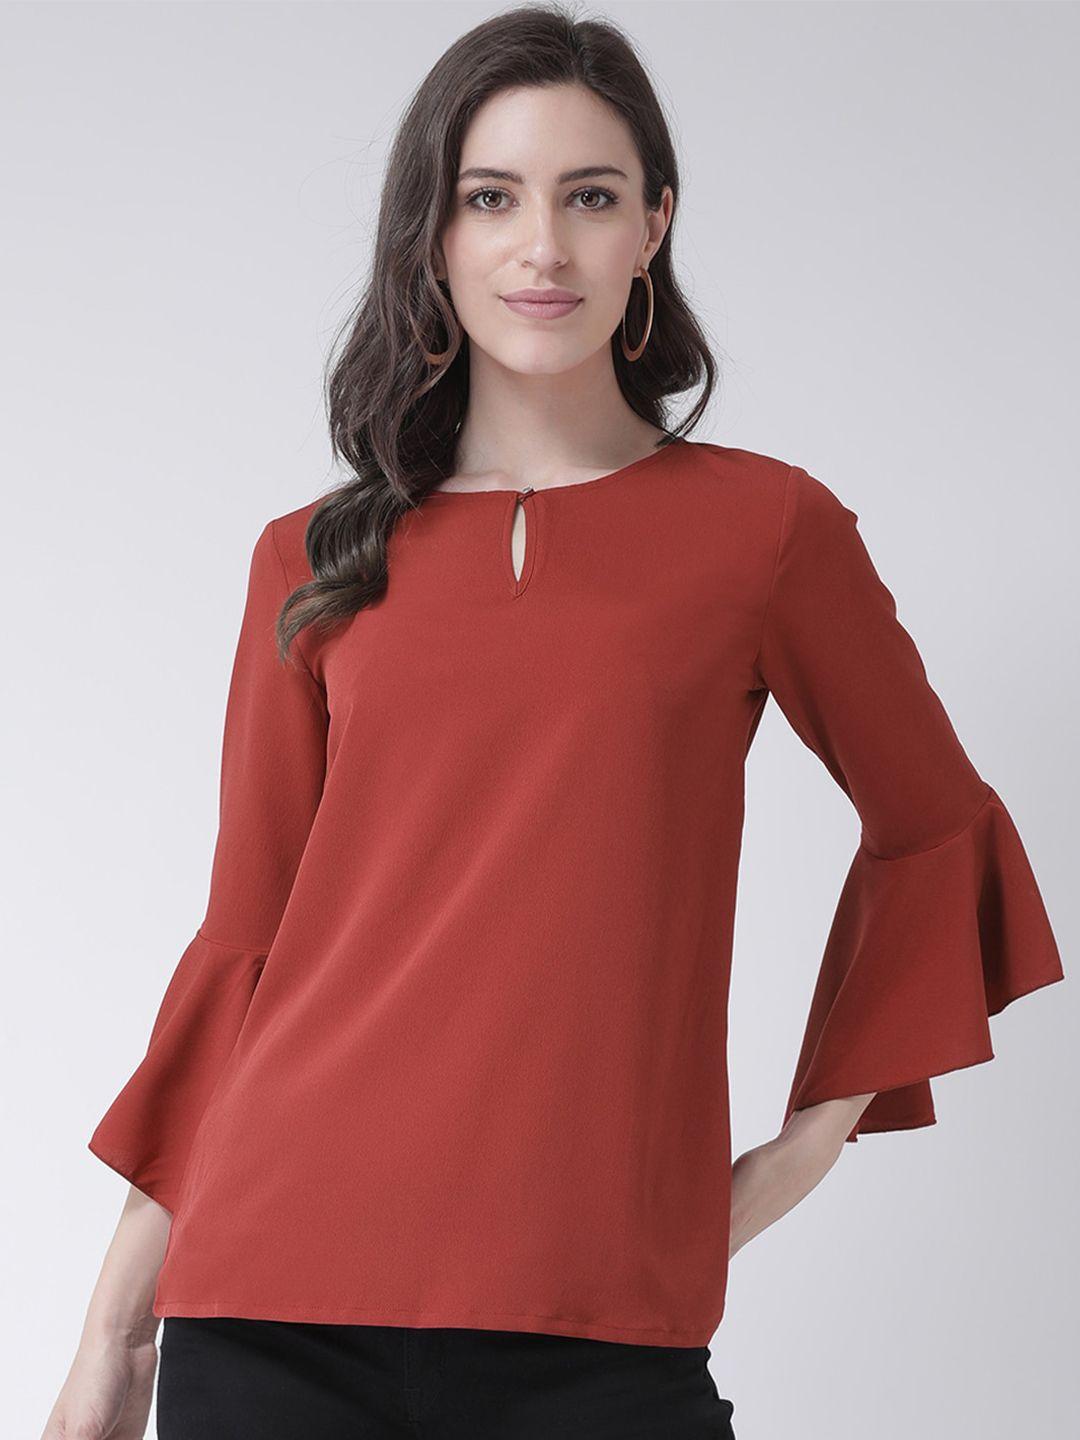 the-vanca-women-red-keyhole-neck-bell-sleeves-top